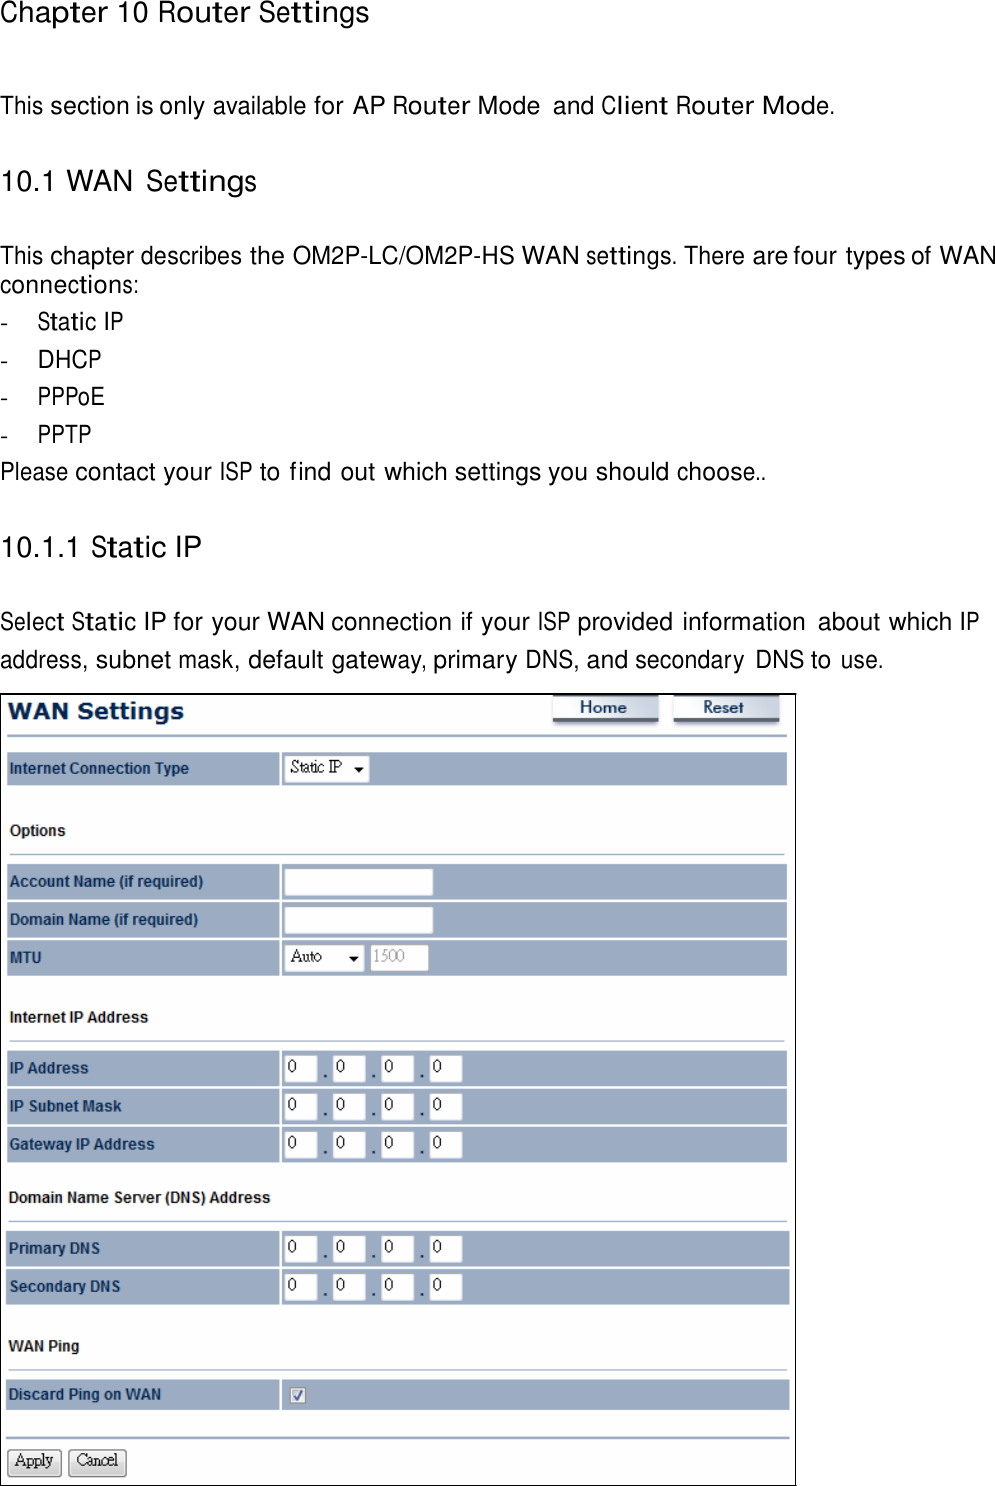   Chapter 10 Router Settings    This section is only available for AP Router Mode  and Client Router Mode.   10.1 WAN Settings   This chapter describes the OM2P-LC/OM2P-HS WAN settings. There are four types of WAN connections: - Static IP - DHCP - PPPoE - PPTP Please contact your ISP to find out which settings you should choose..   10.1.1 Static IP   Select Static IP for your WAN connection if your ISP provided information  about which IP address, subnet mask, default gateway, primary DNS, and secondary  DNS to use. 